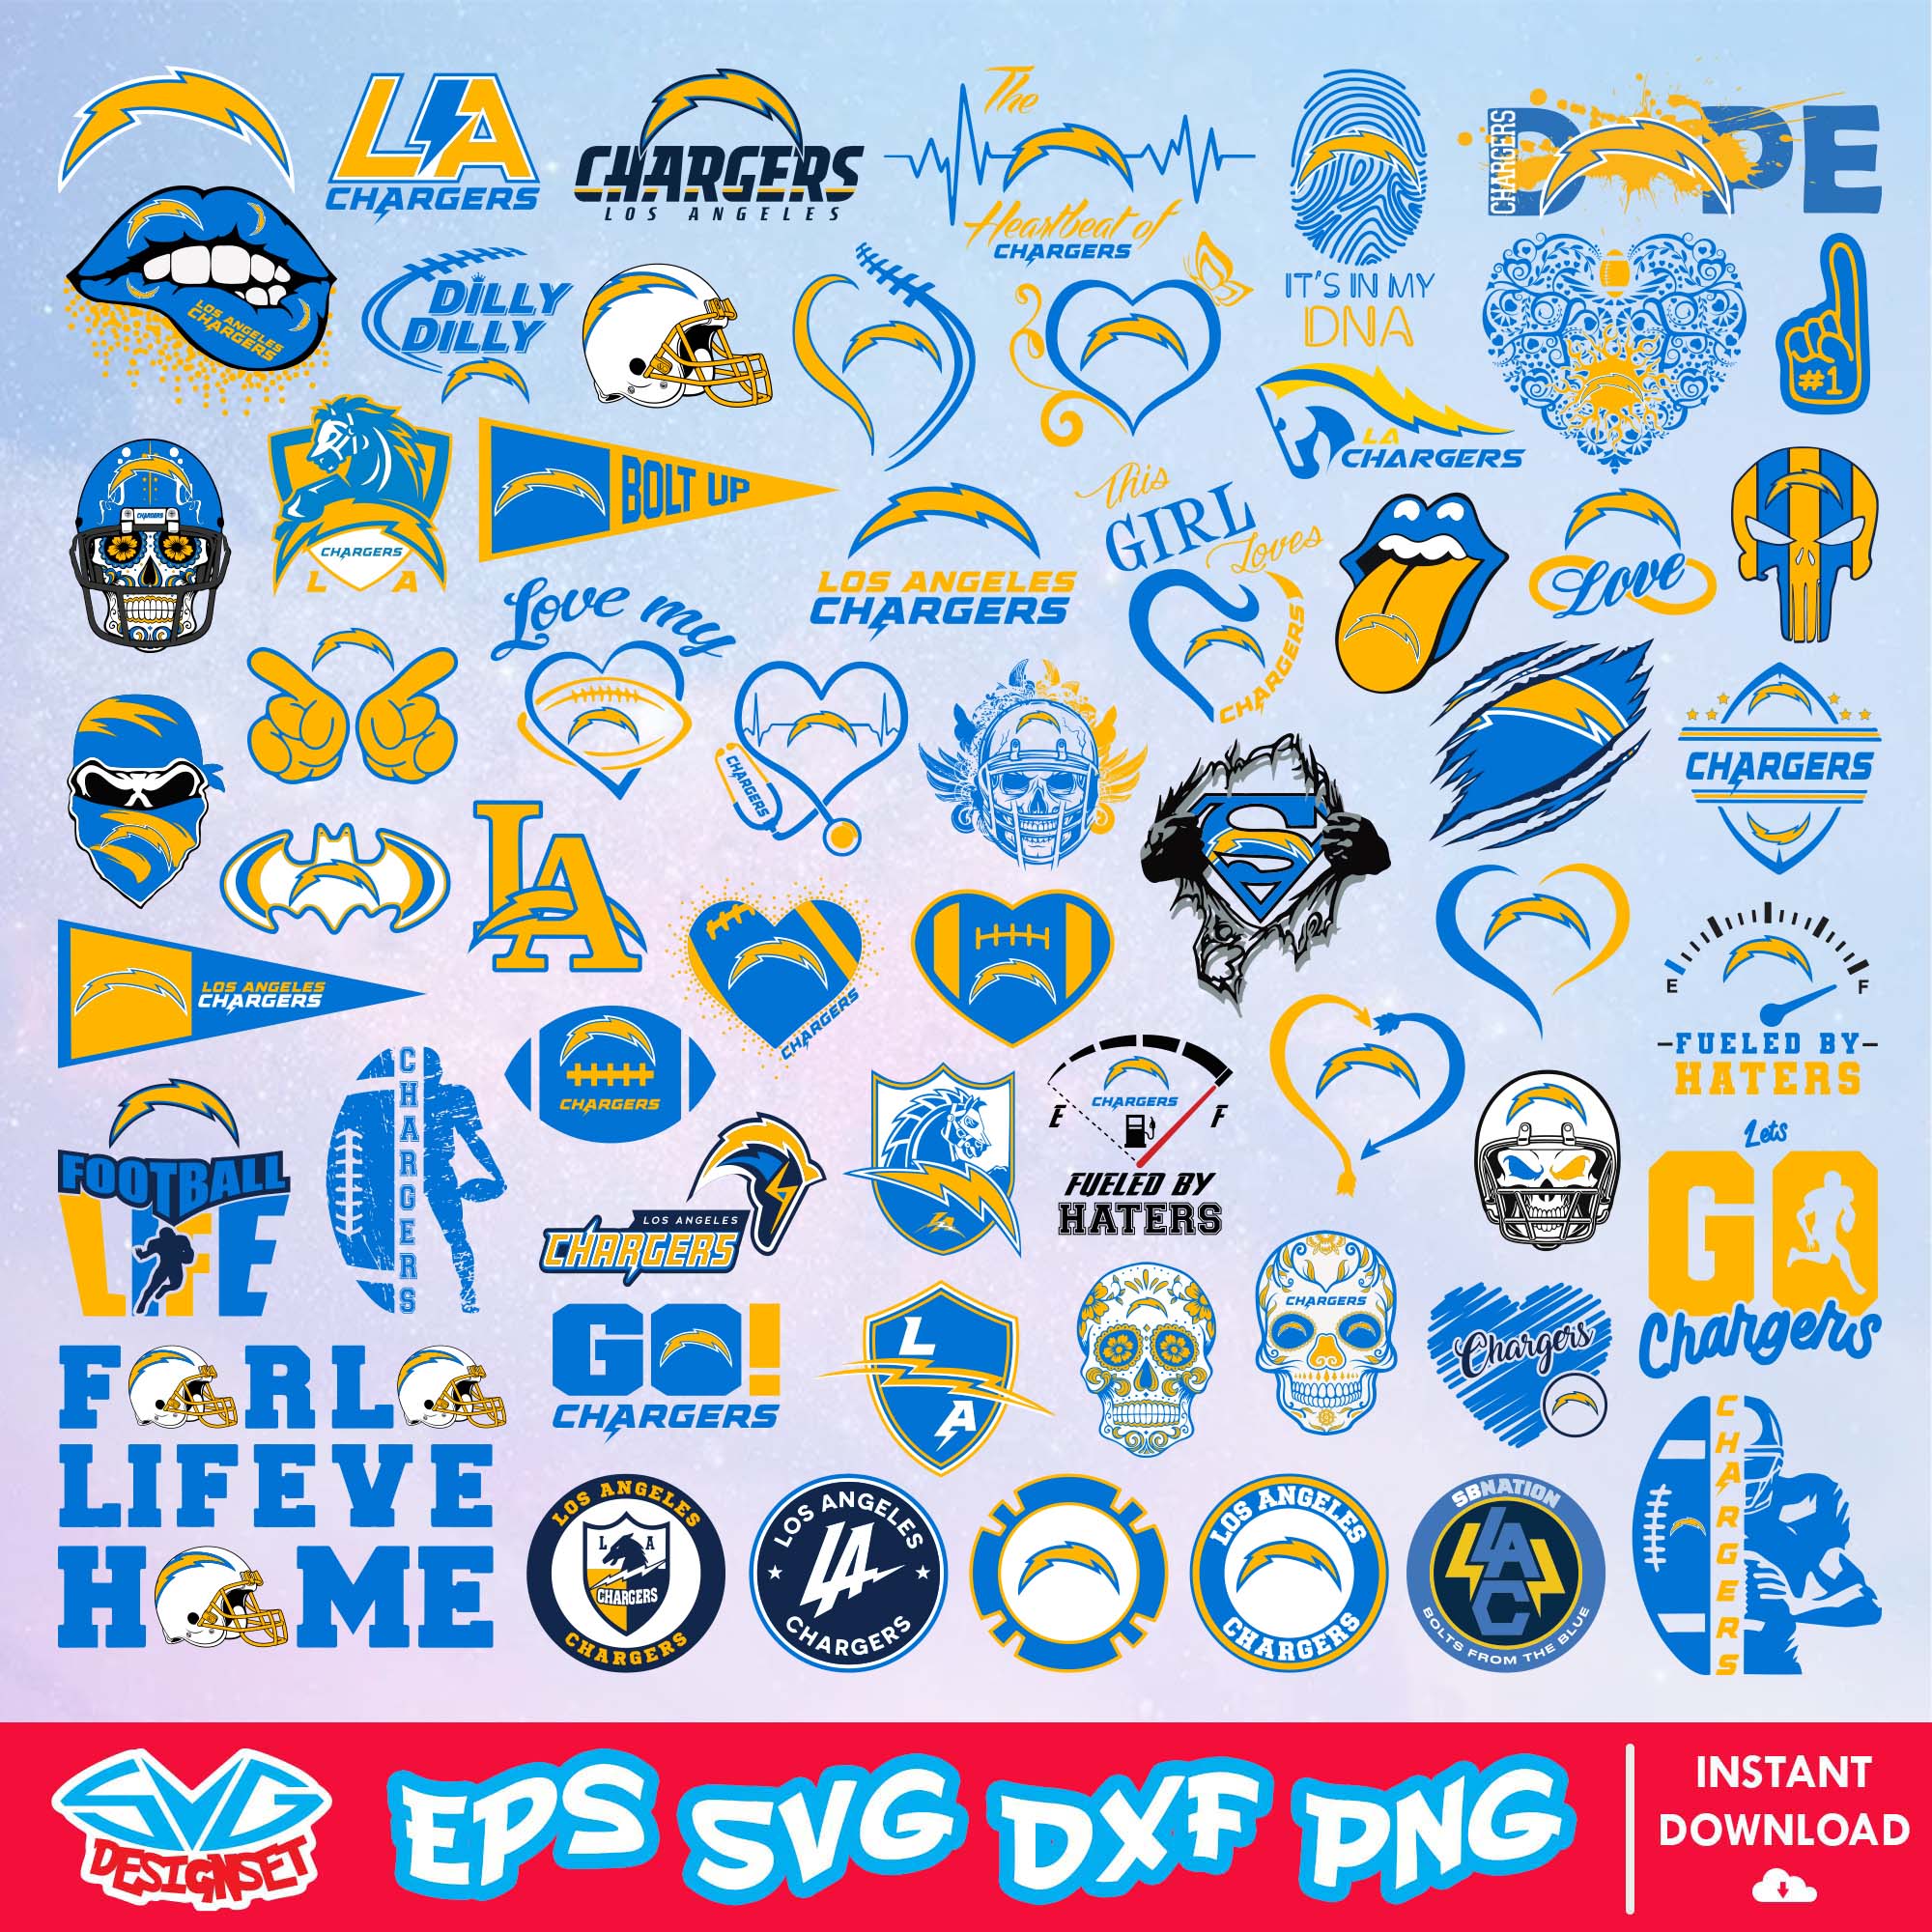 Los Angeles Chargers Svg, National Football League Svg, NFL Svg, NFL Team Svg, American Football Svg, Sport Svg, Clipart, Cut Files, Cricut, Silhouette, Digital Download - SVGDesignSet